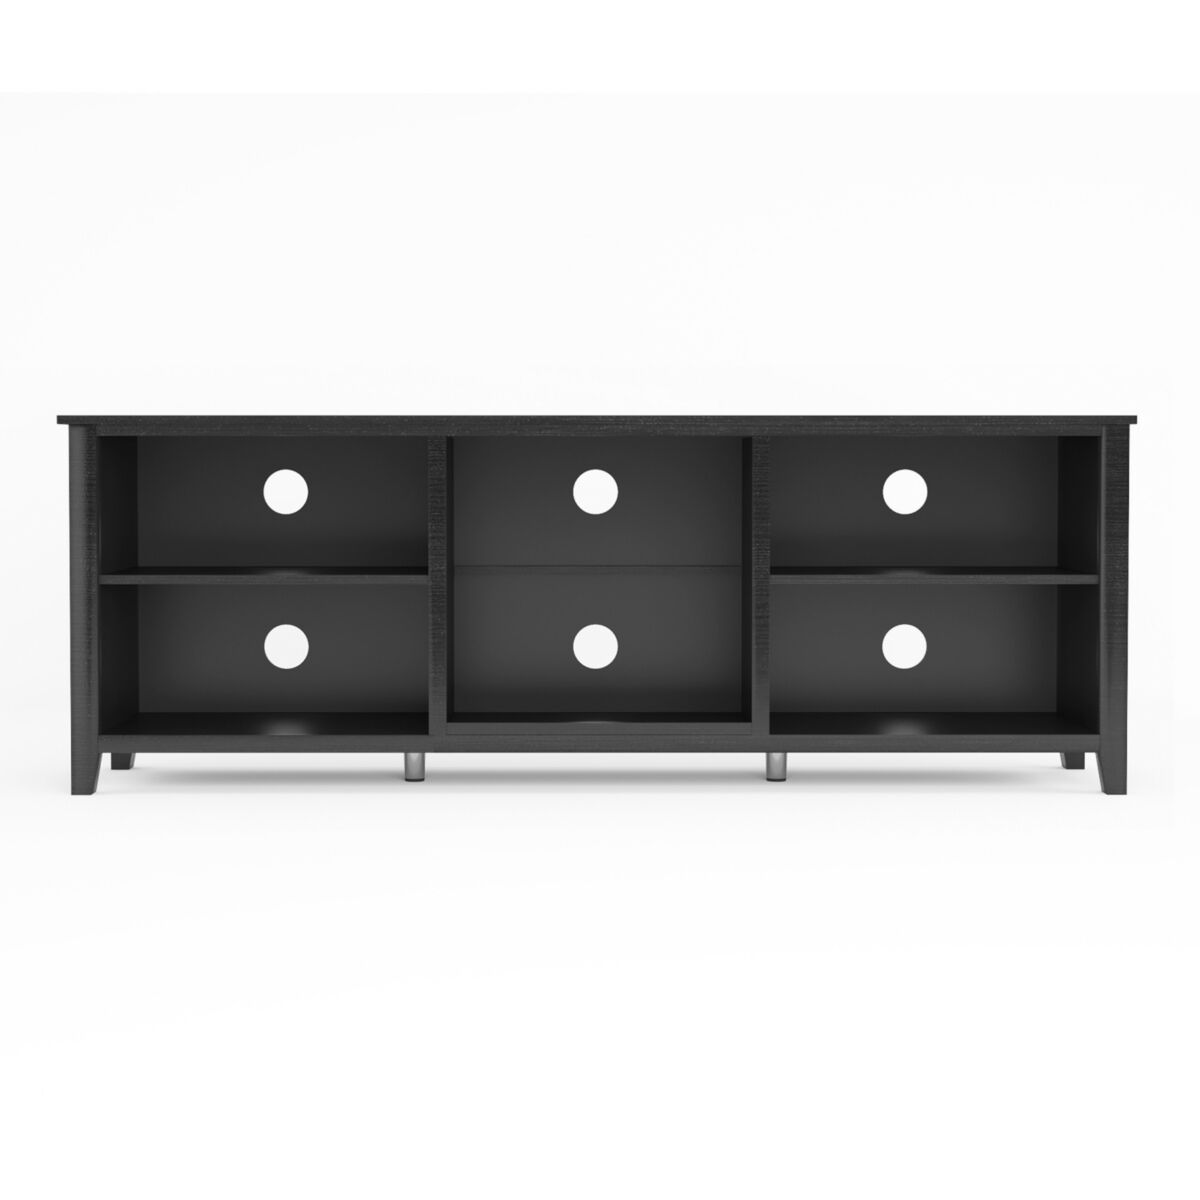 Simplie Fun Tv Stand Storage Media Console Entertainment Center, Tradition Black, without drawer - Black